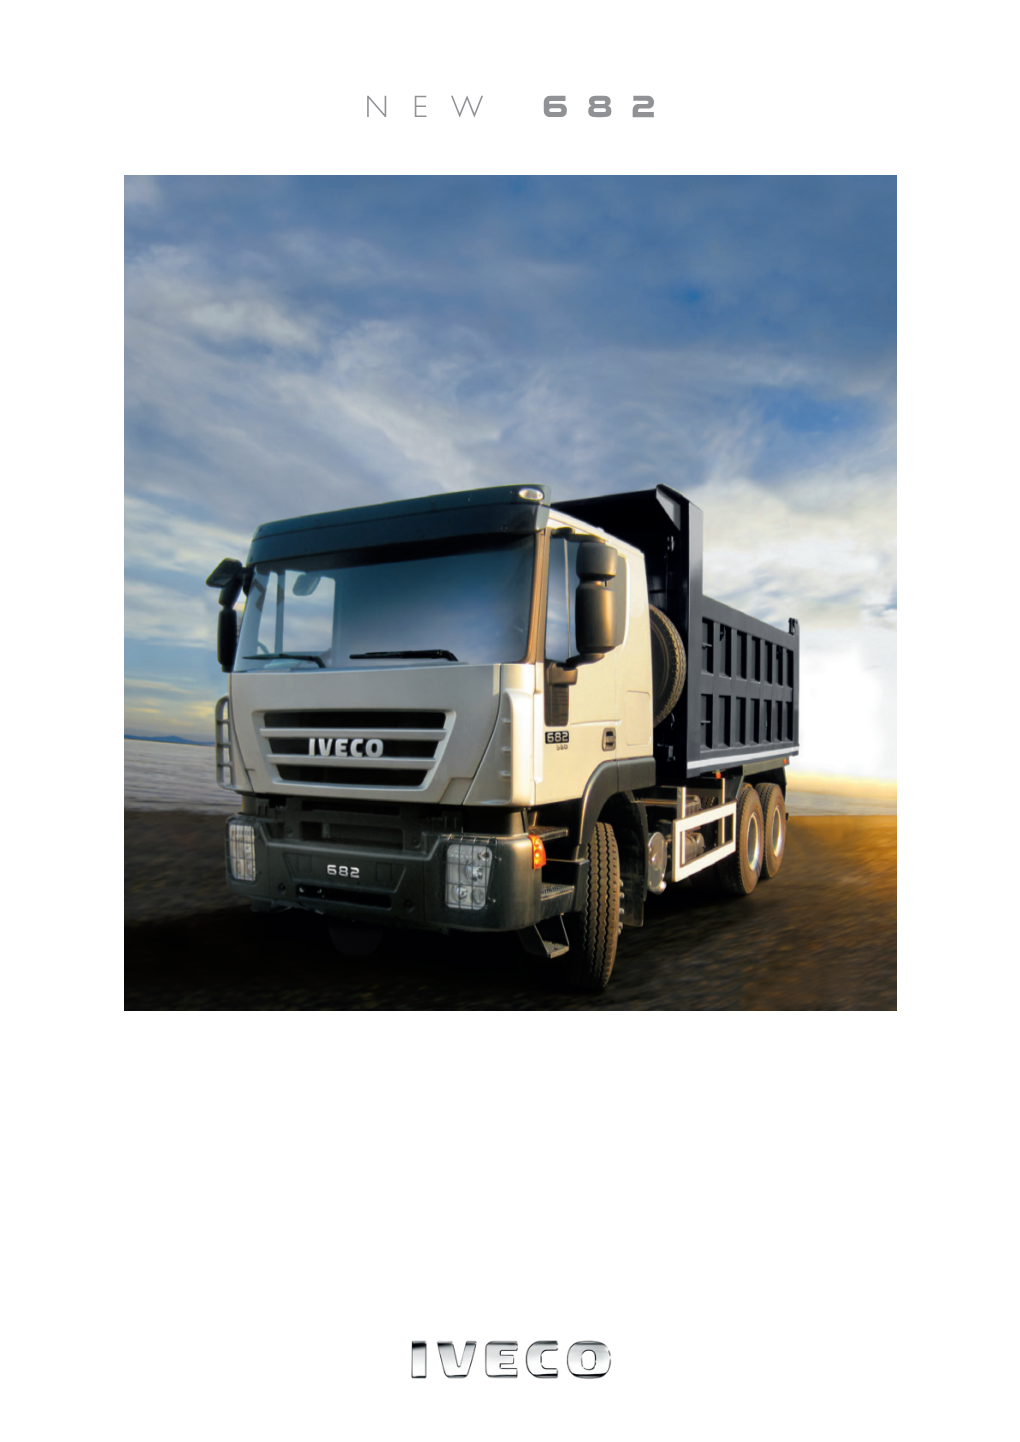 Iveco Stralis Cabs, and Is Powered by Iveco Fiat Powertrain Cursor Engine, Which Is Equipped with the Latest-Generation Common Rail Fuel Injection System